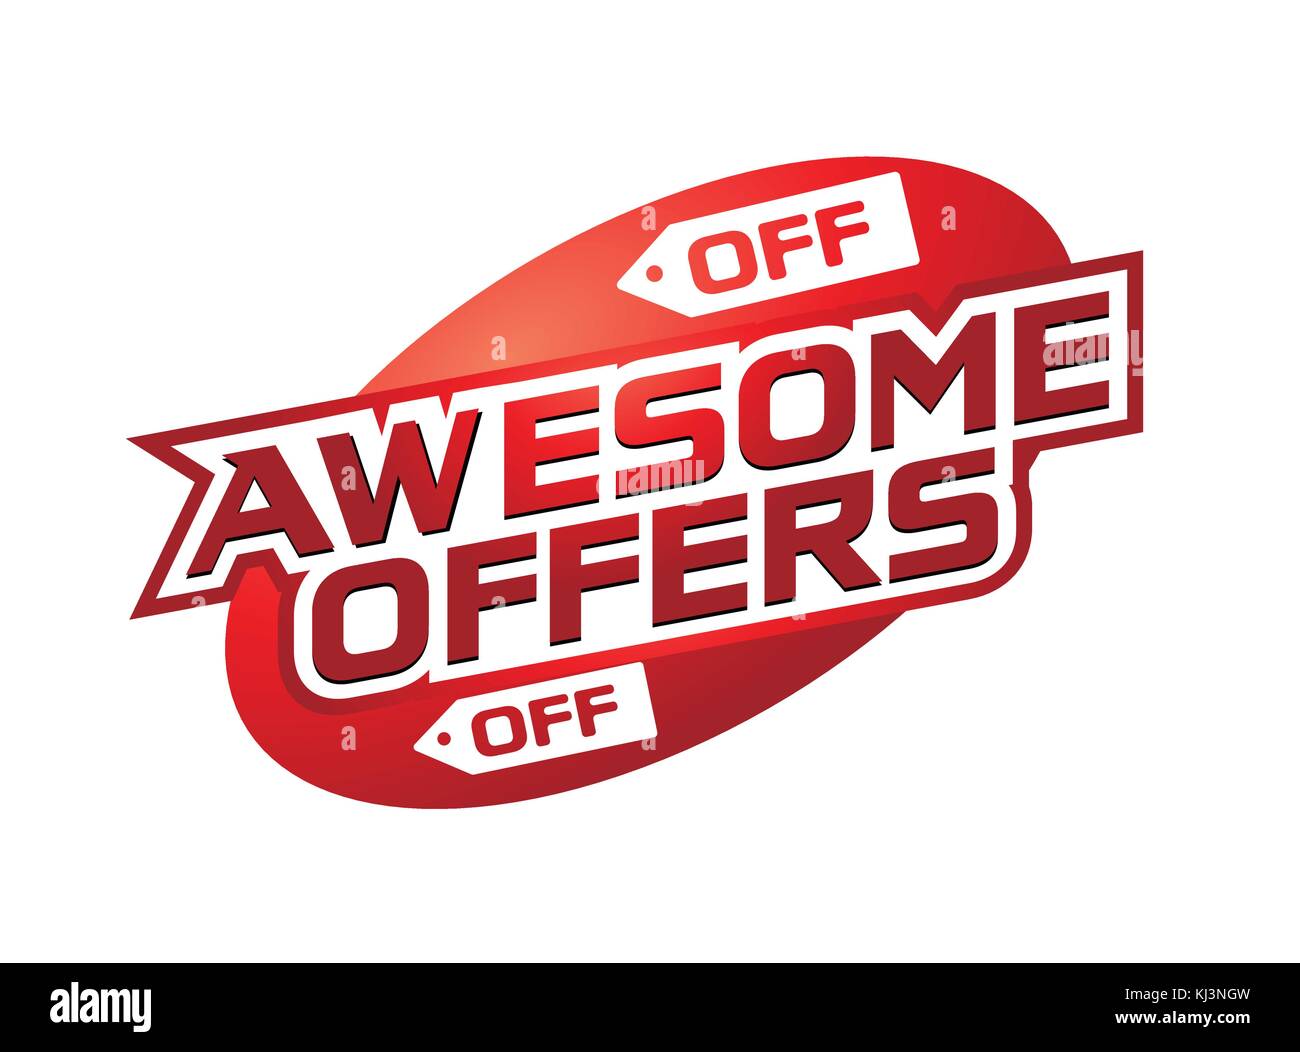 awesome offers illustration, offer design, offers sign, sign design, isolated on white background. Stock Vector